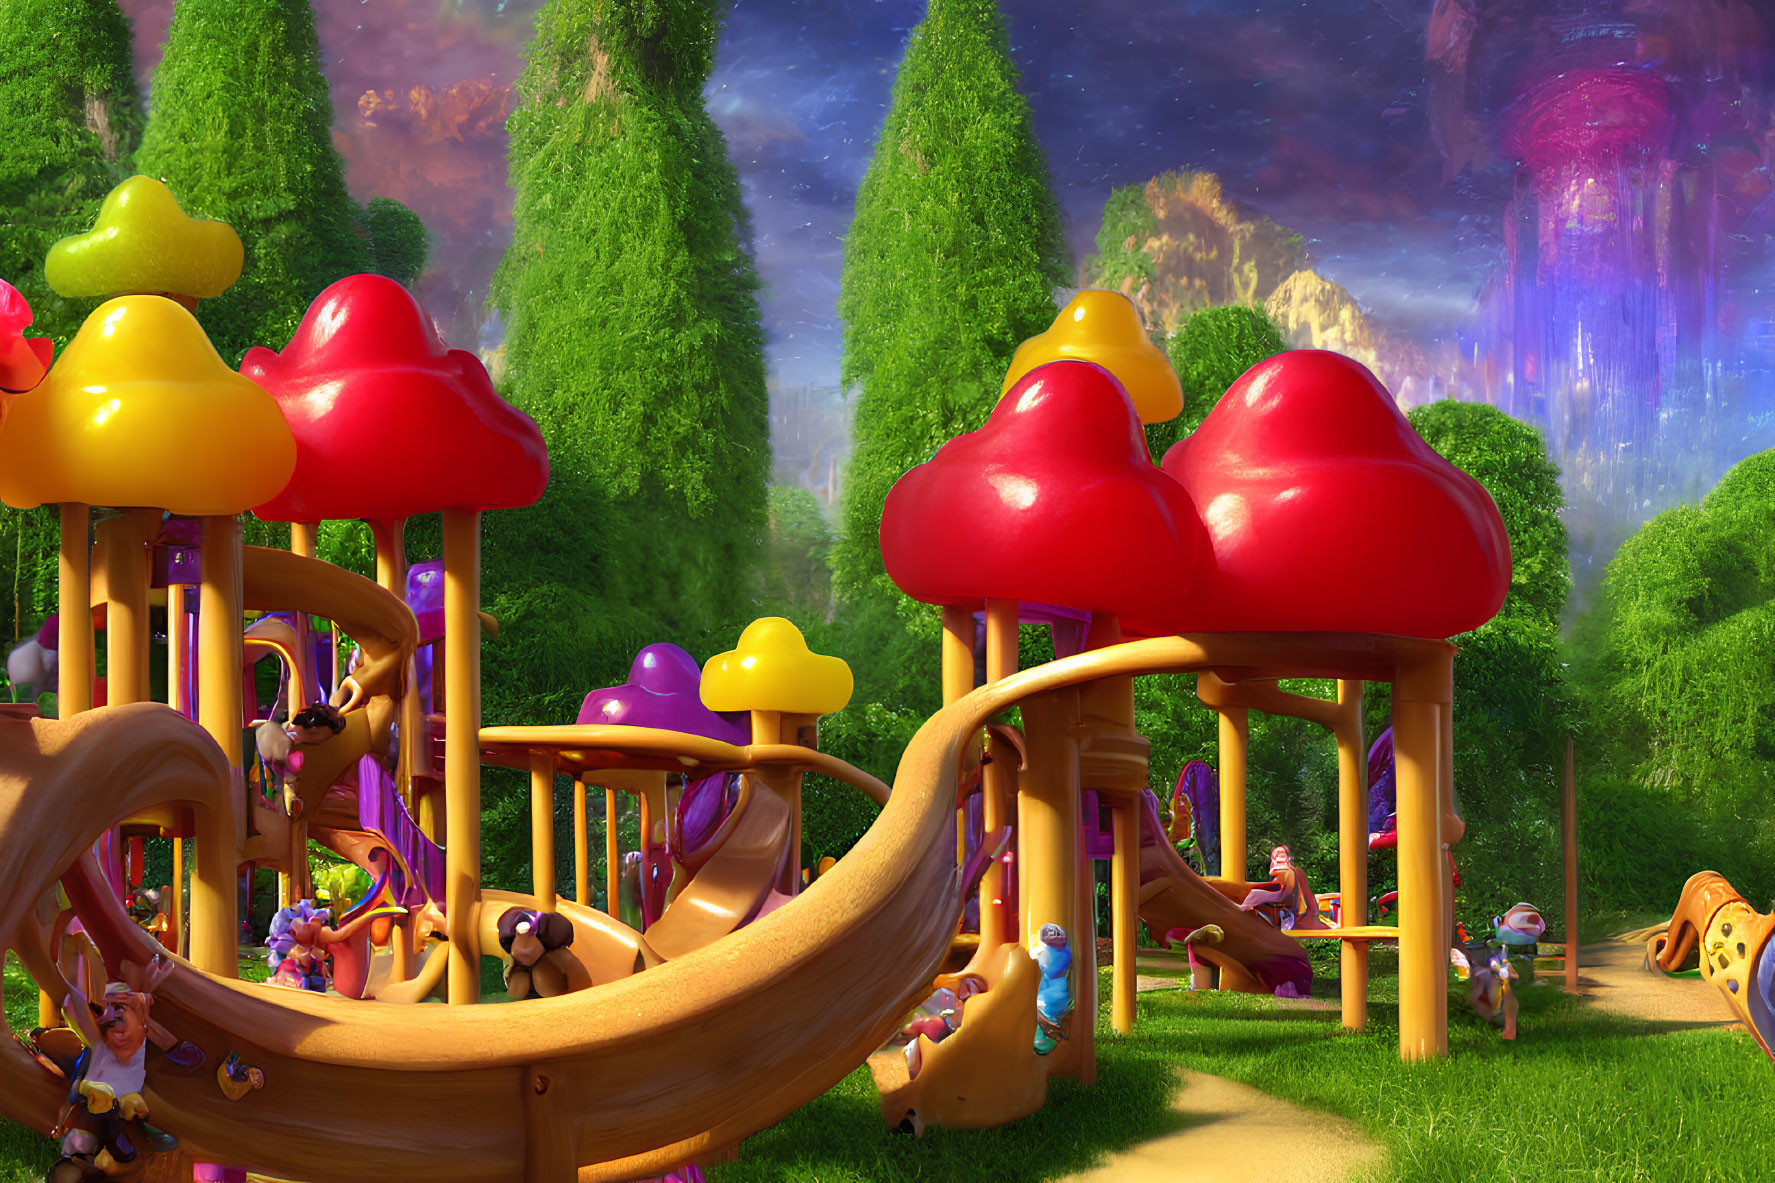 Colorful Mushroom Fantasy Playground with Whimsical Creatures